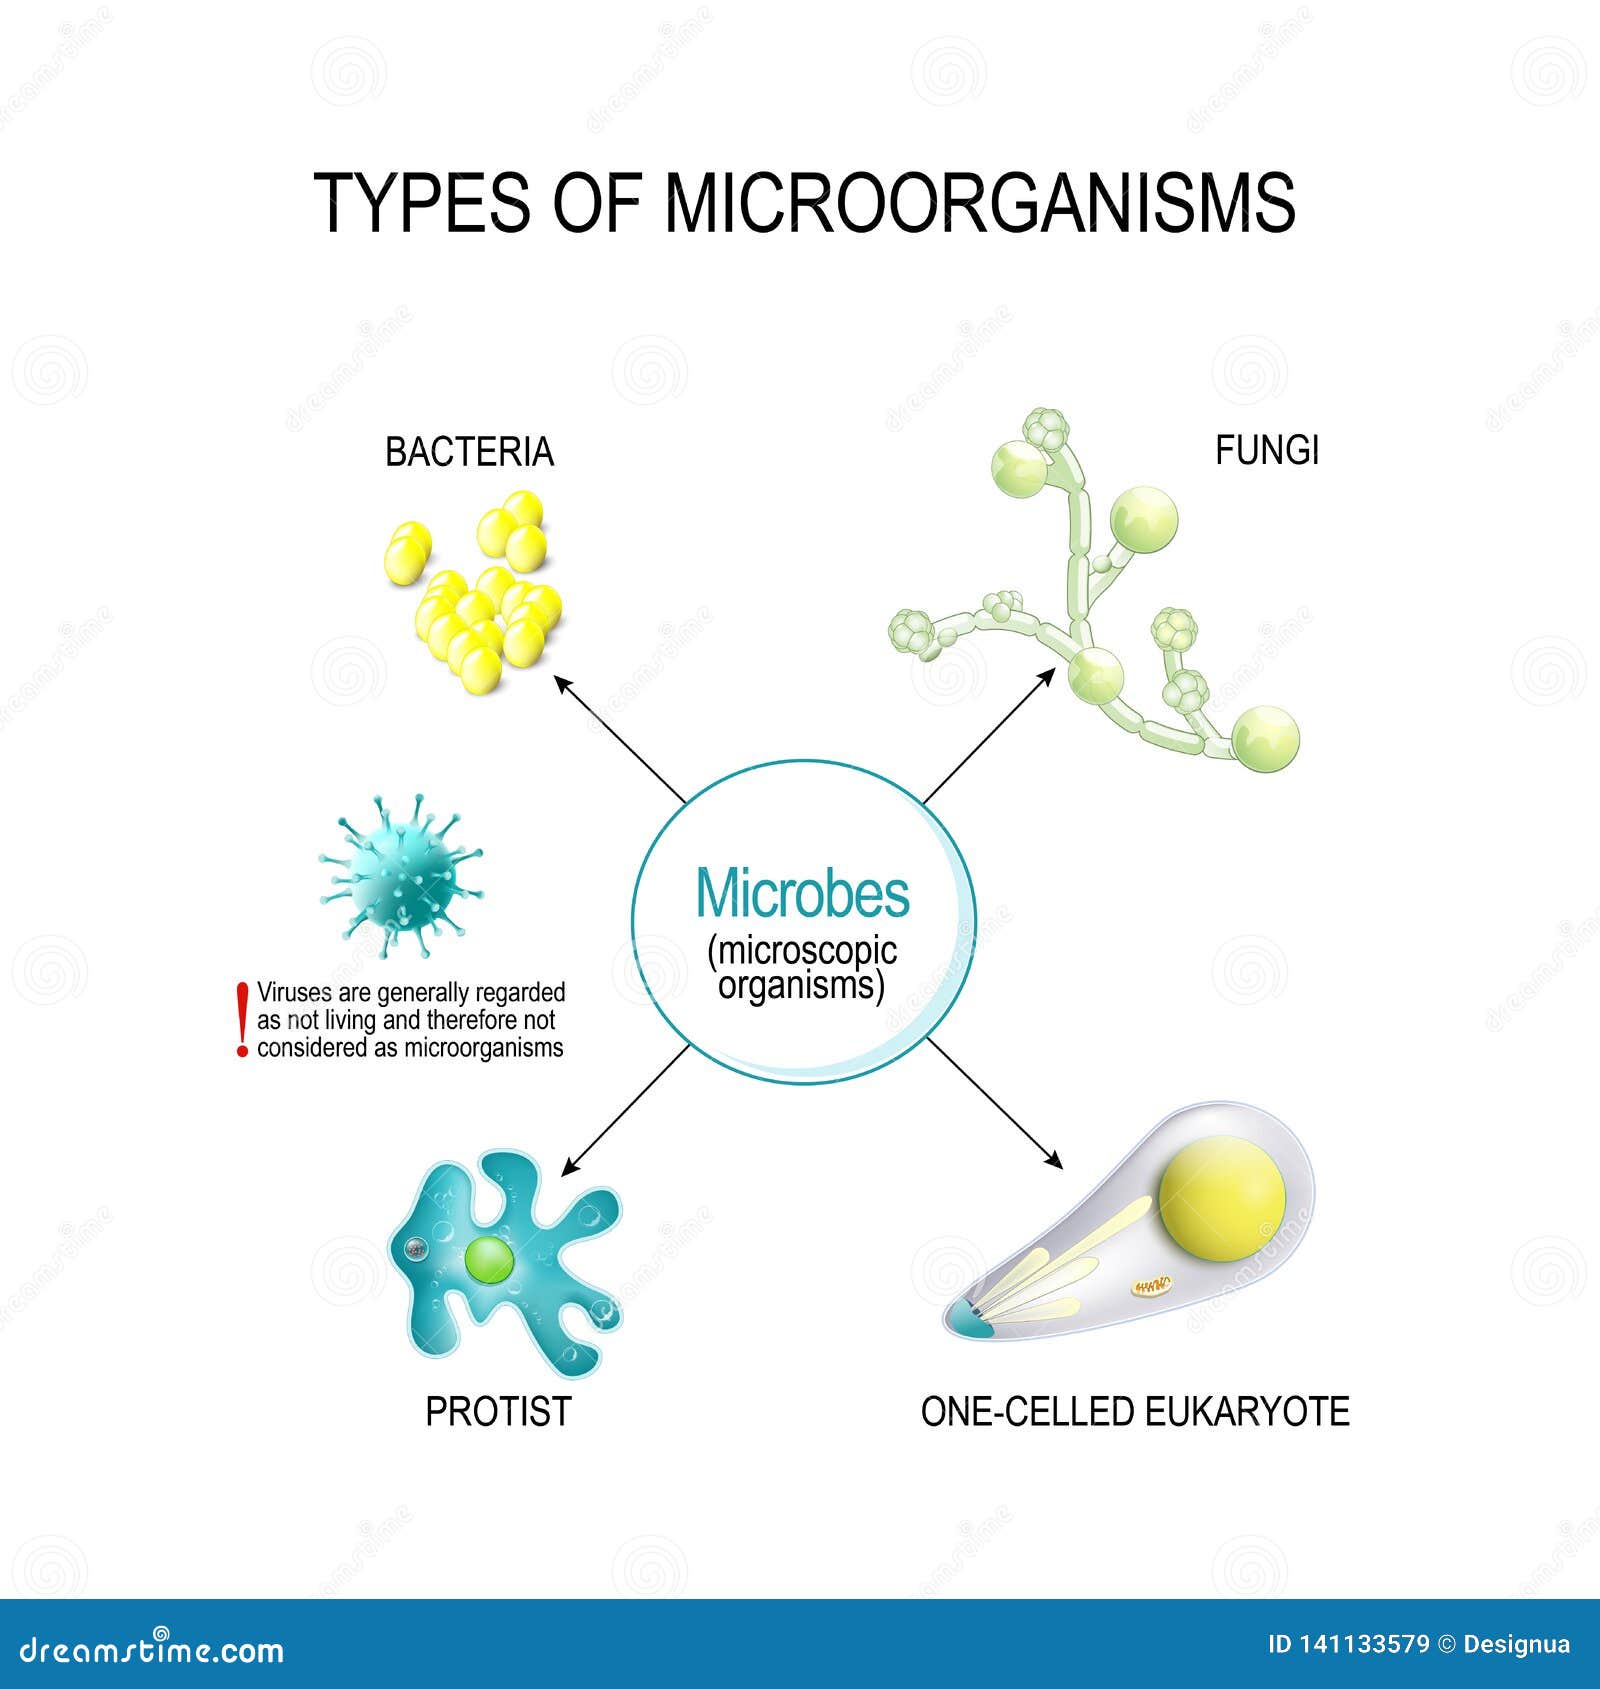 types of microorganisms. bacteria, fungi, one-celled eukaryote, and protist